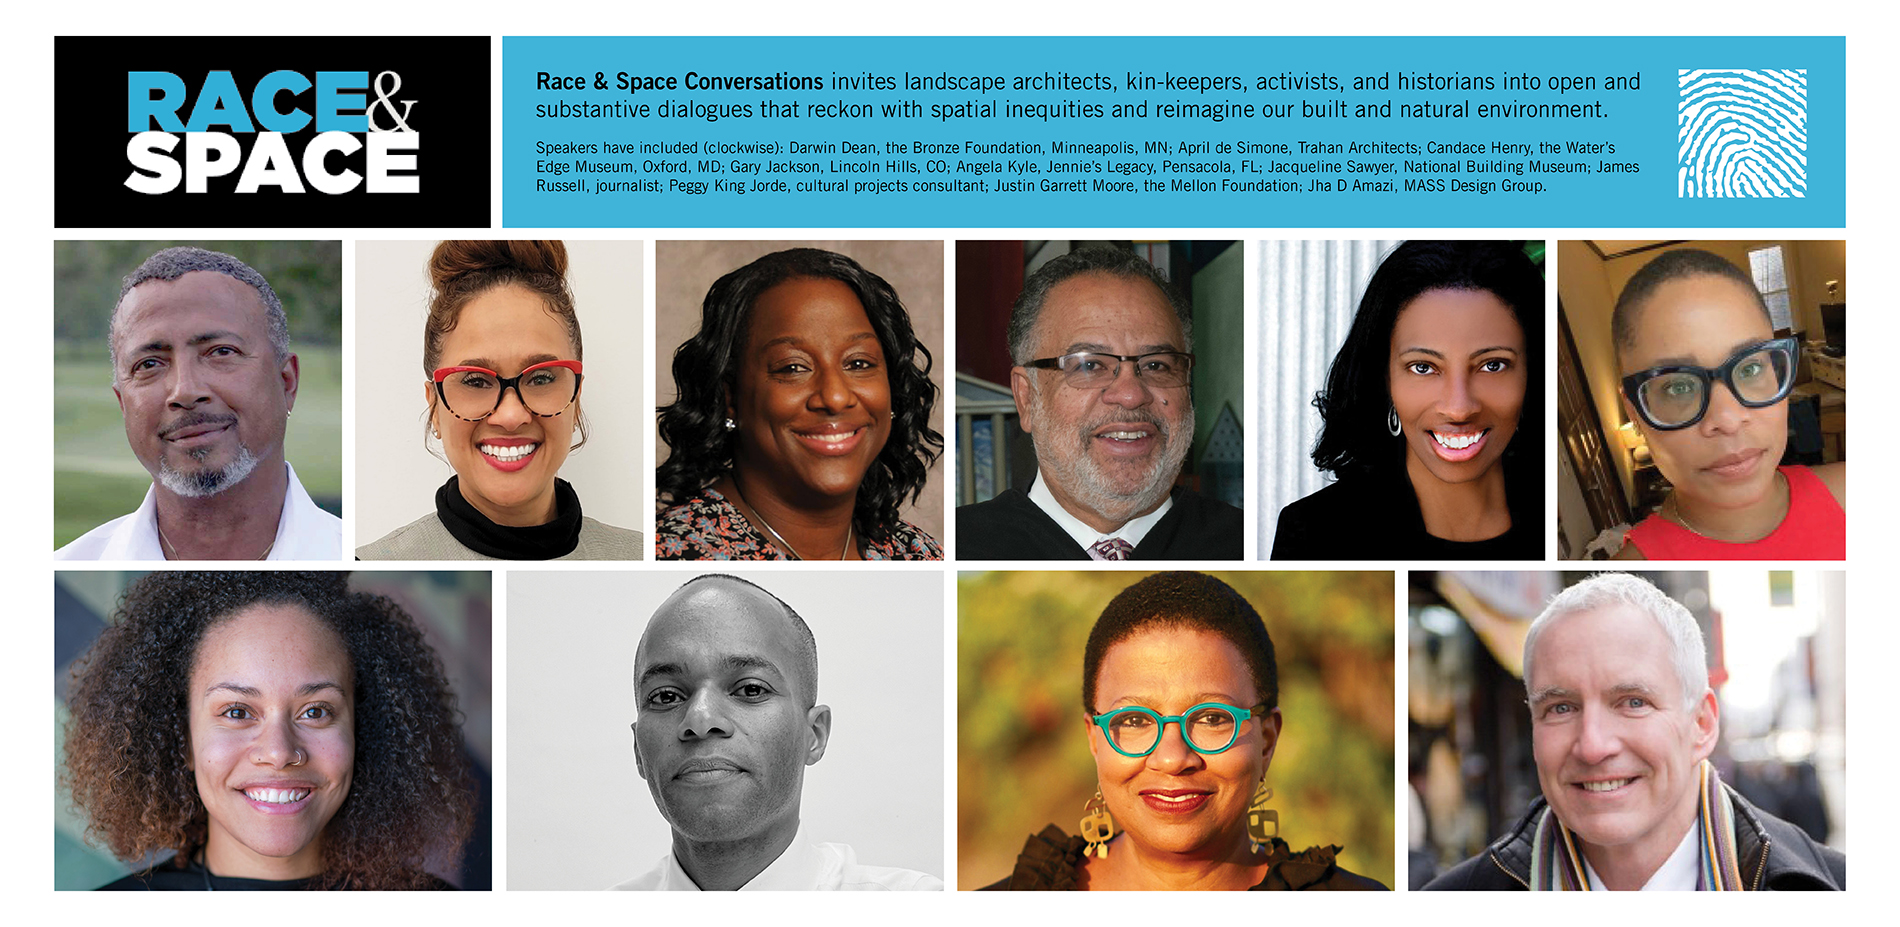 “Landslide: Race and Space – Page 16 – Race and Space Conversations panelists”